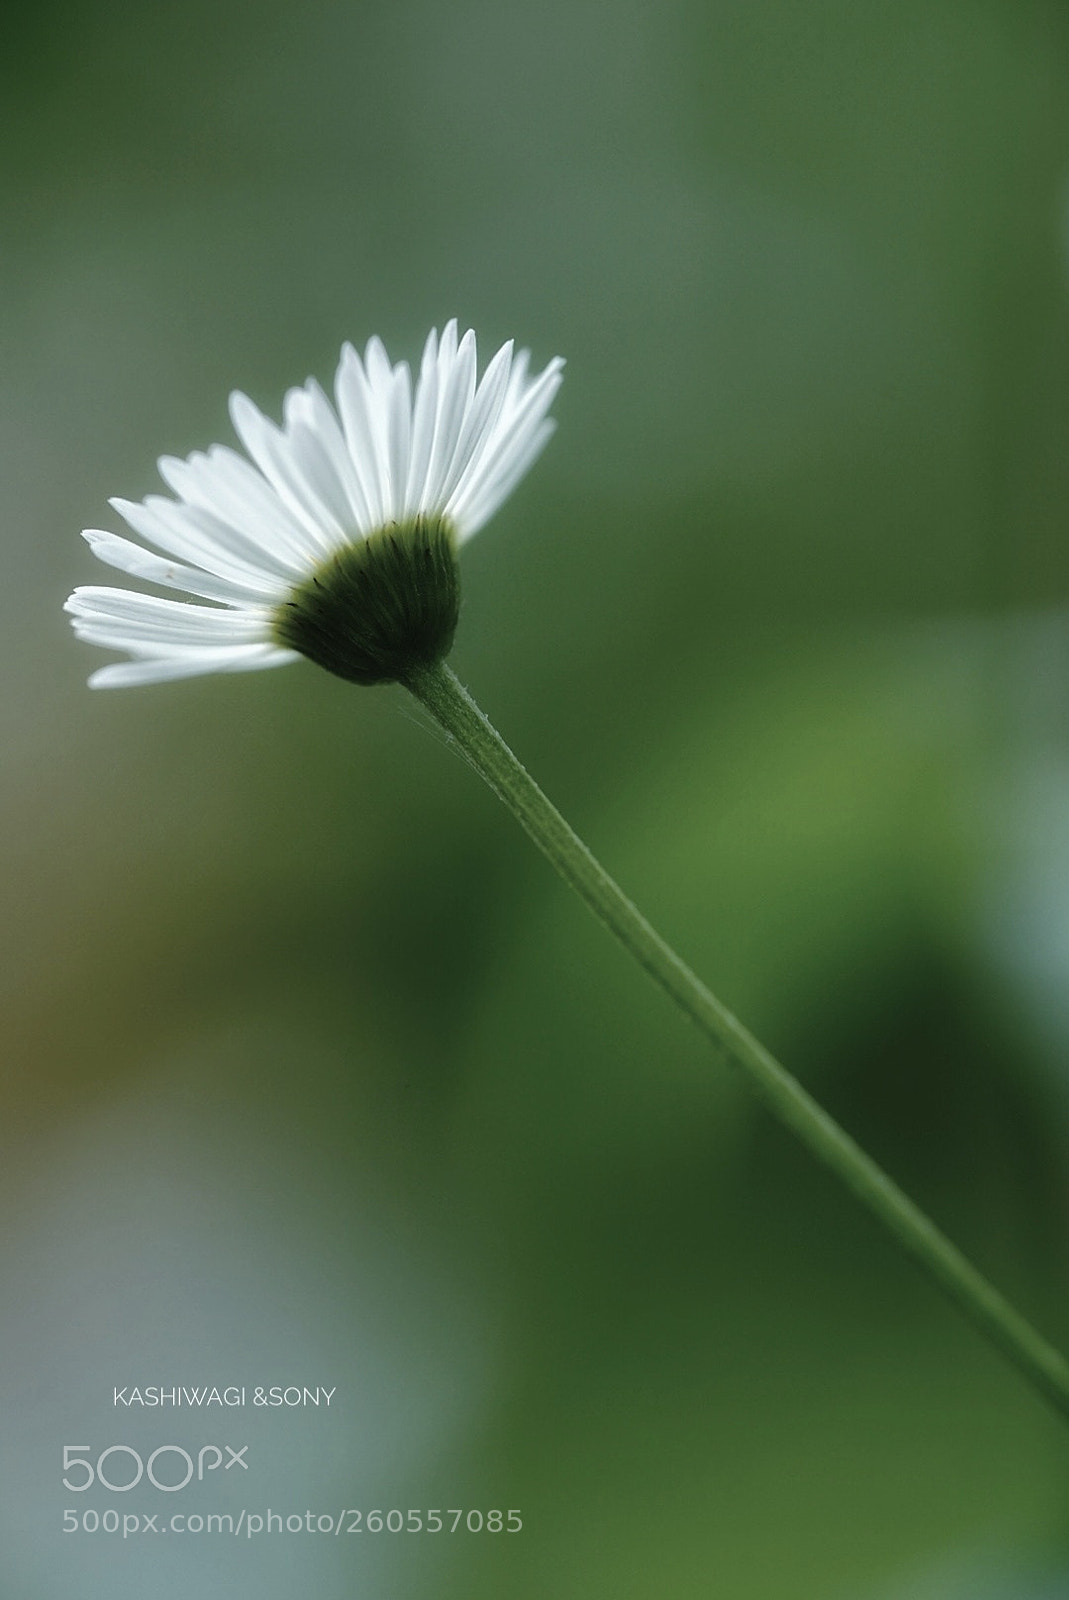 Sony a7 II sample photo. Erigeron melts in green photography